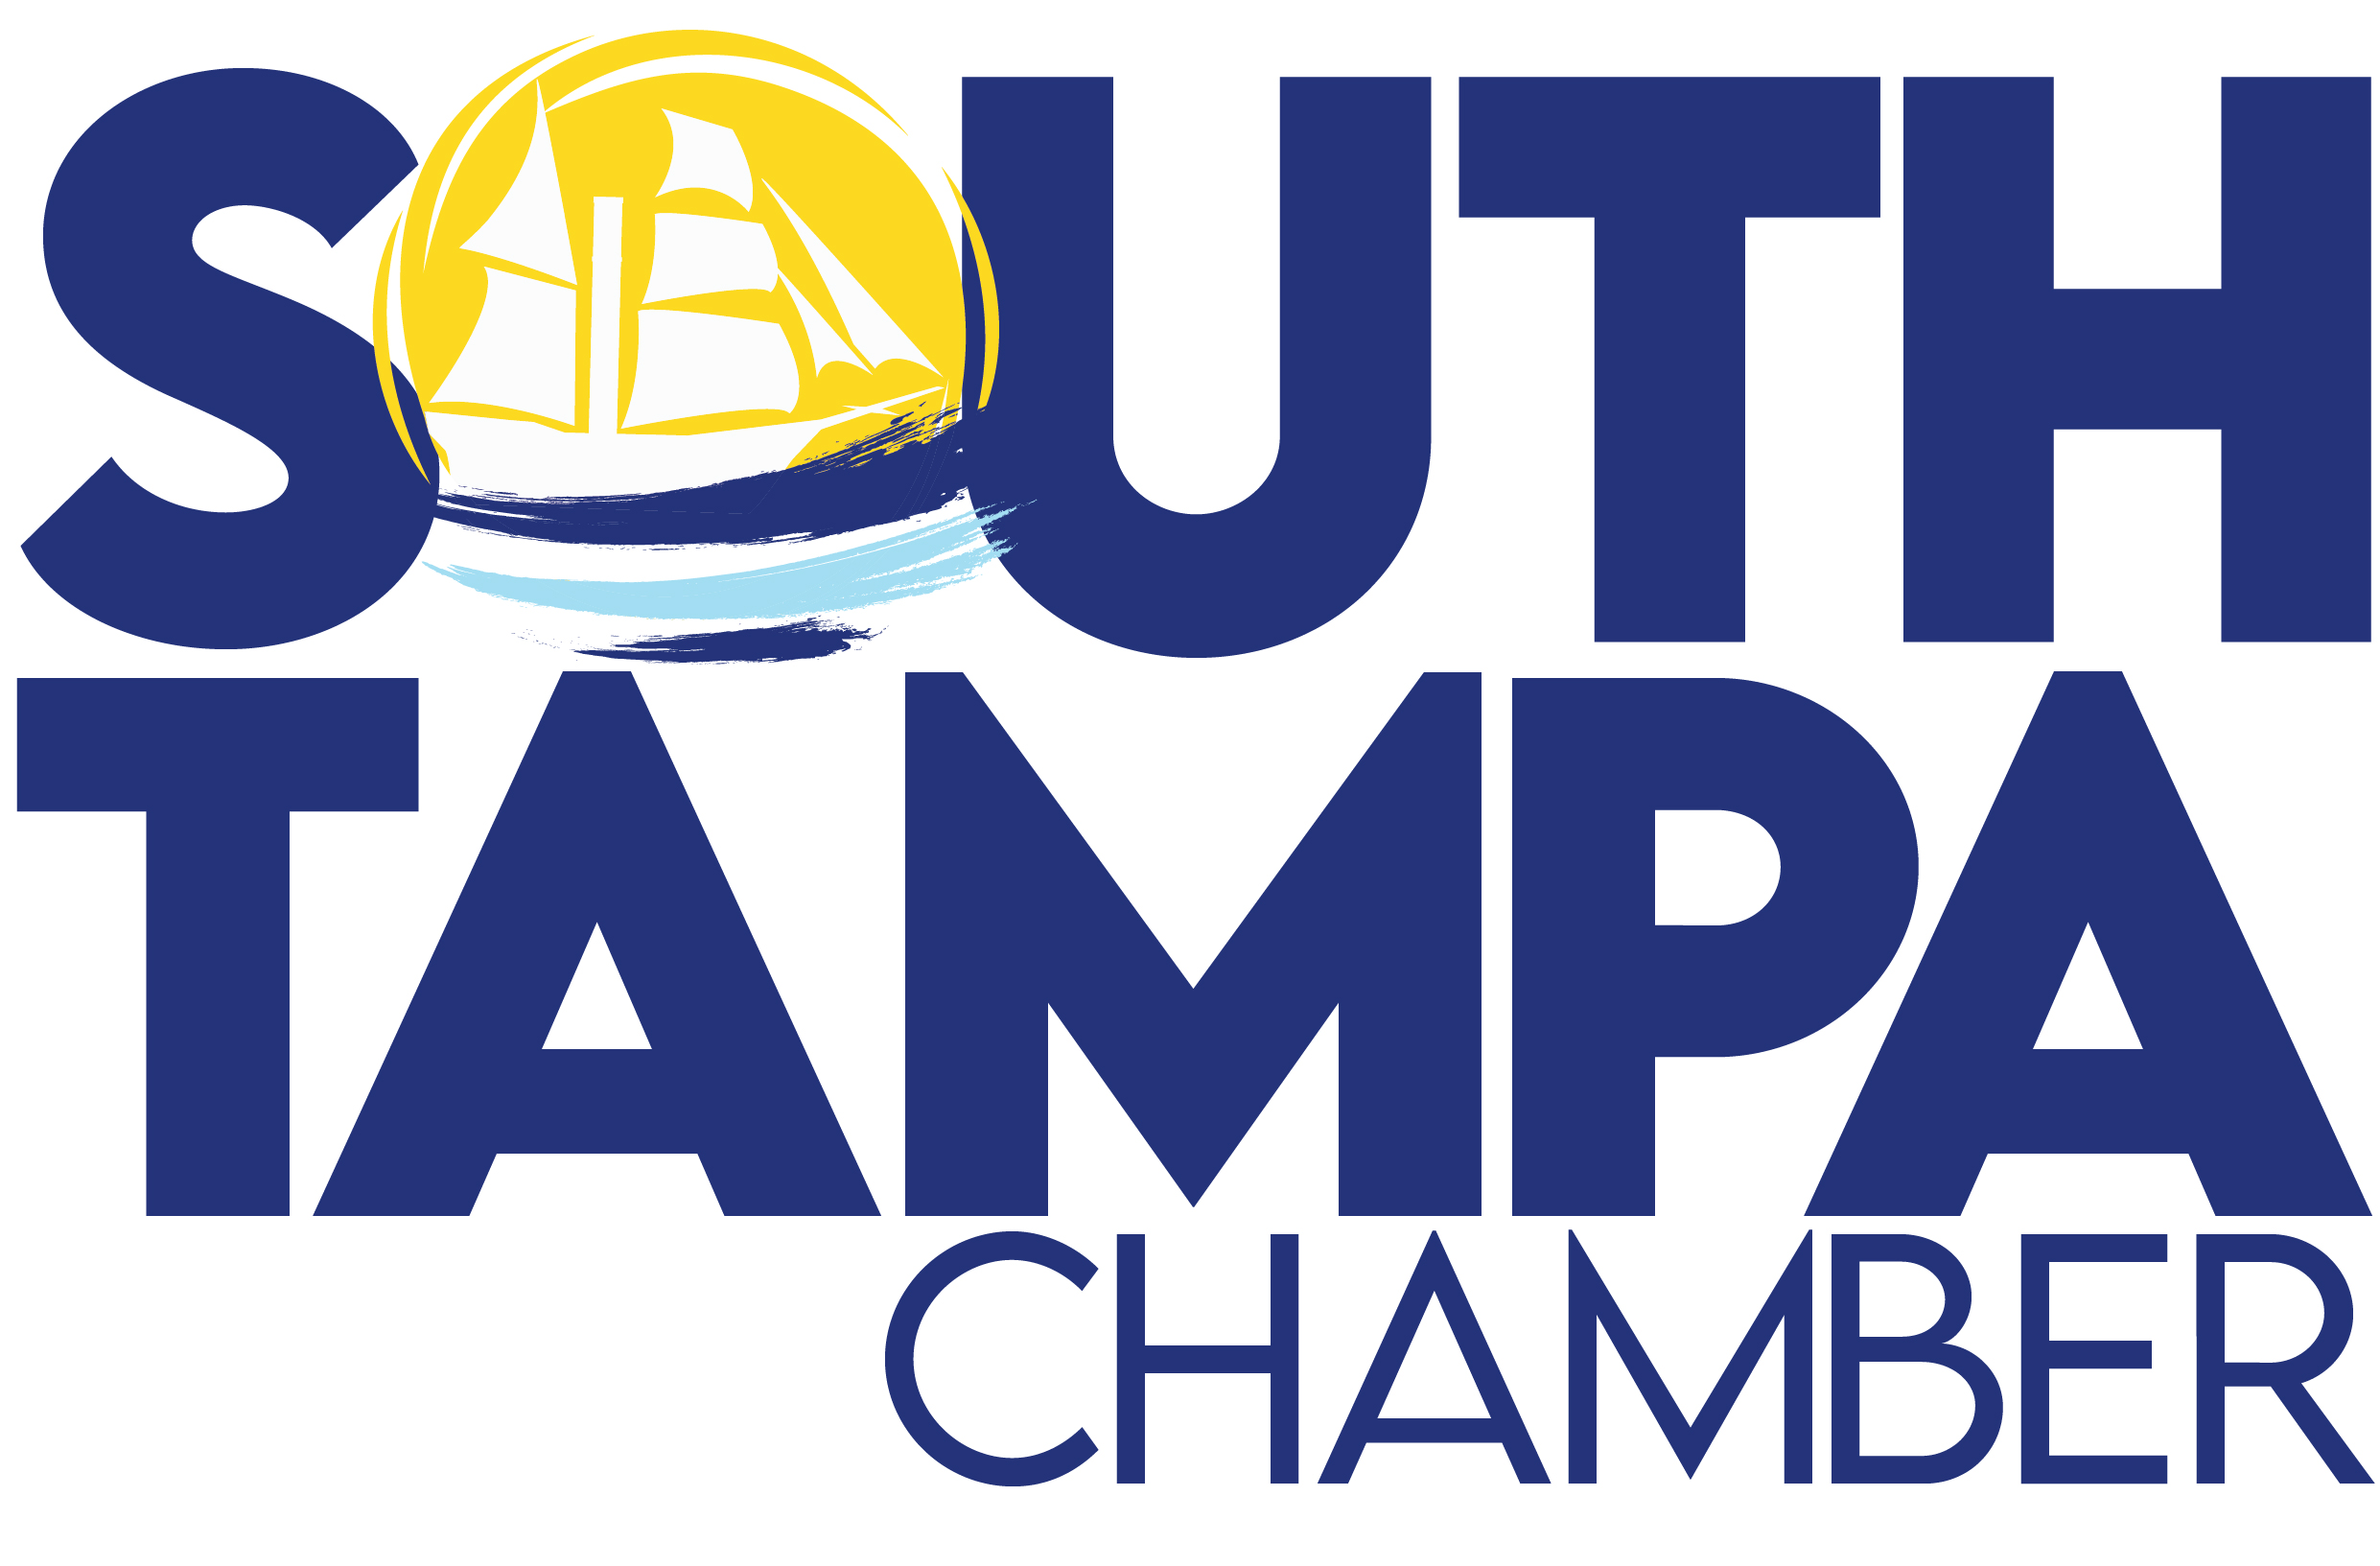 South Tampa Chamber Annual Award Winners Announced